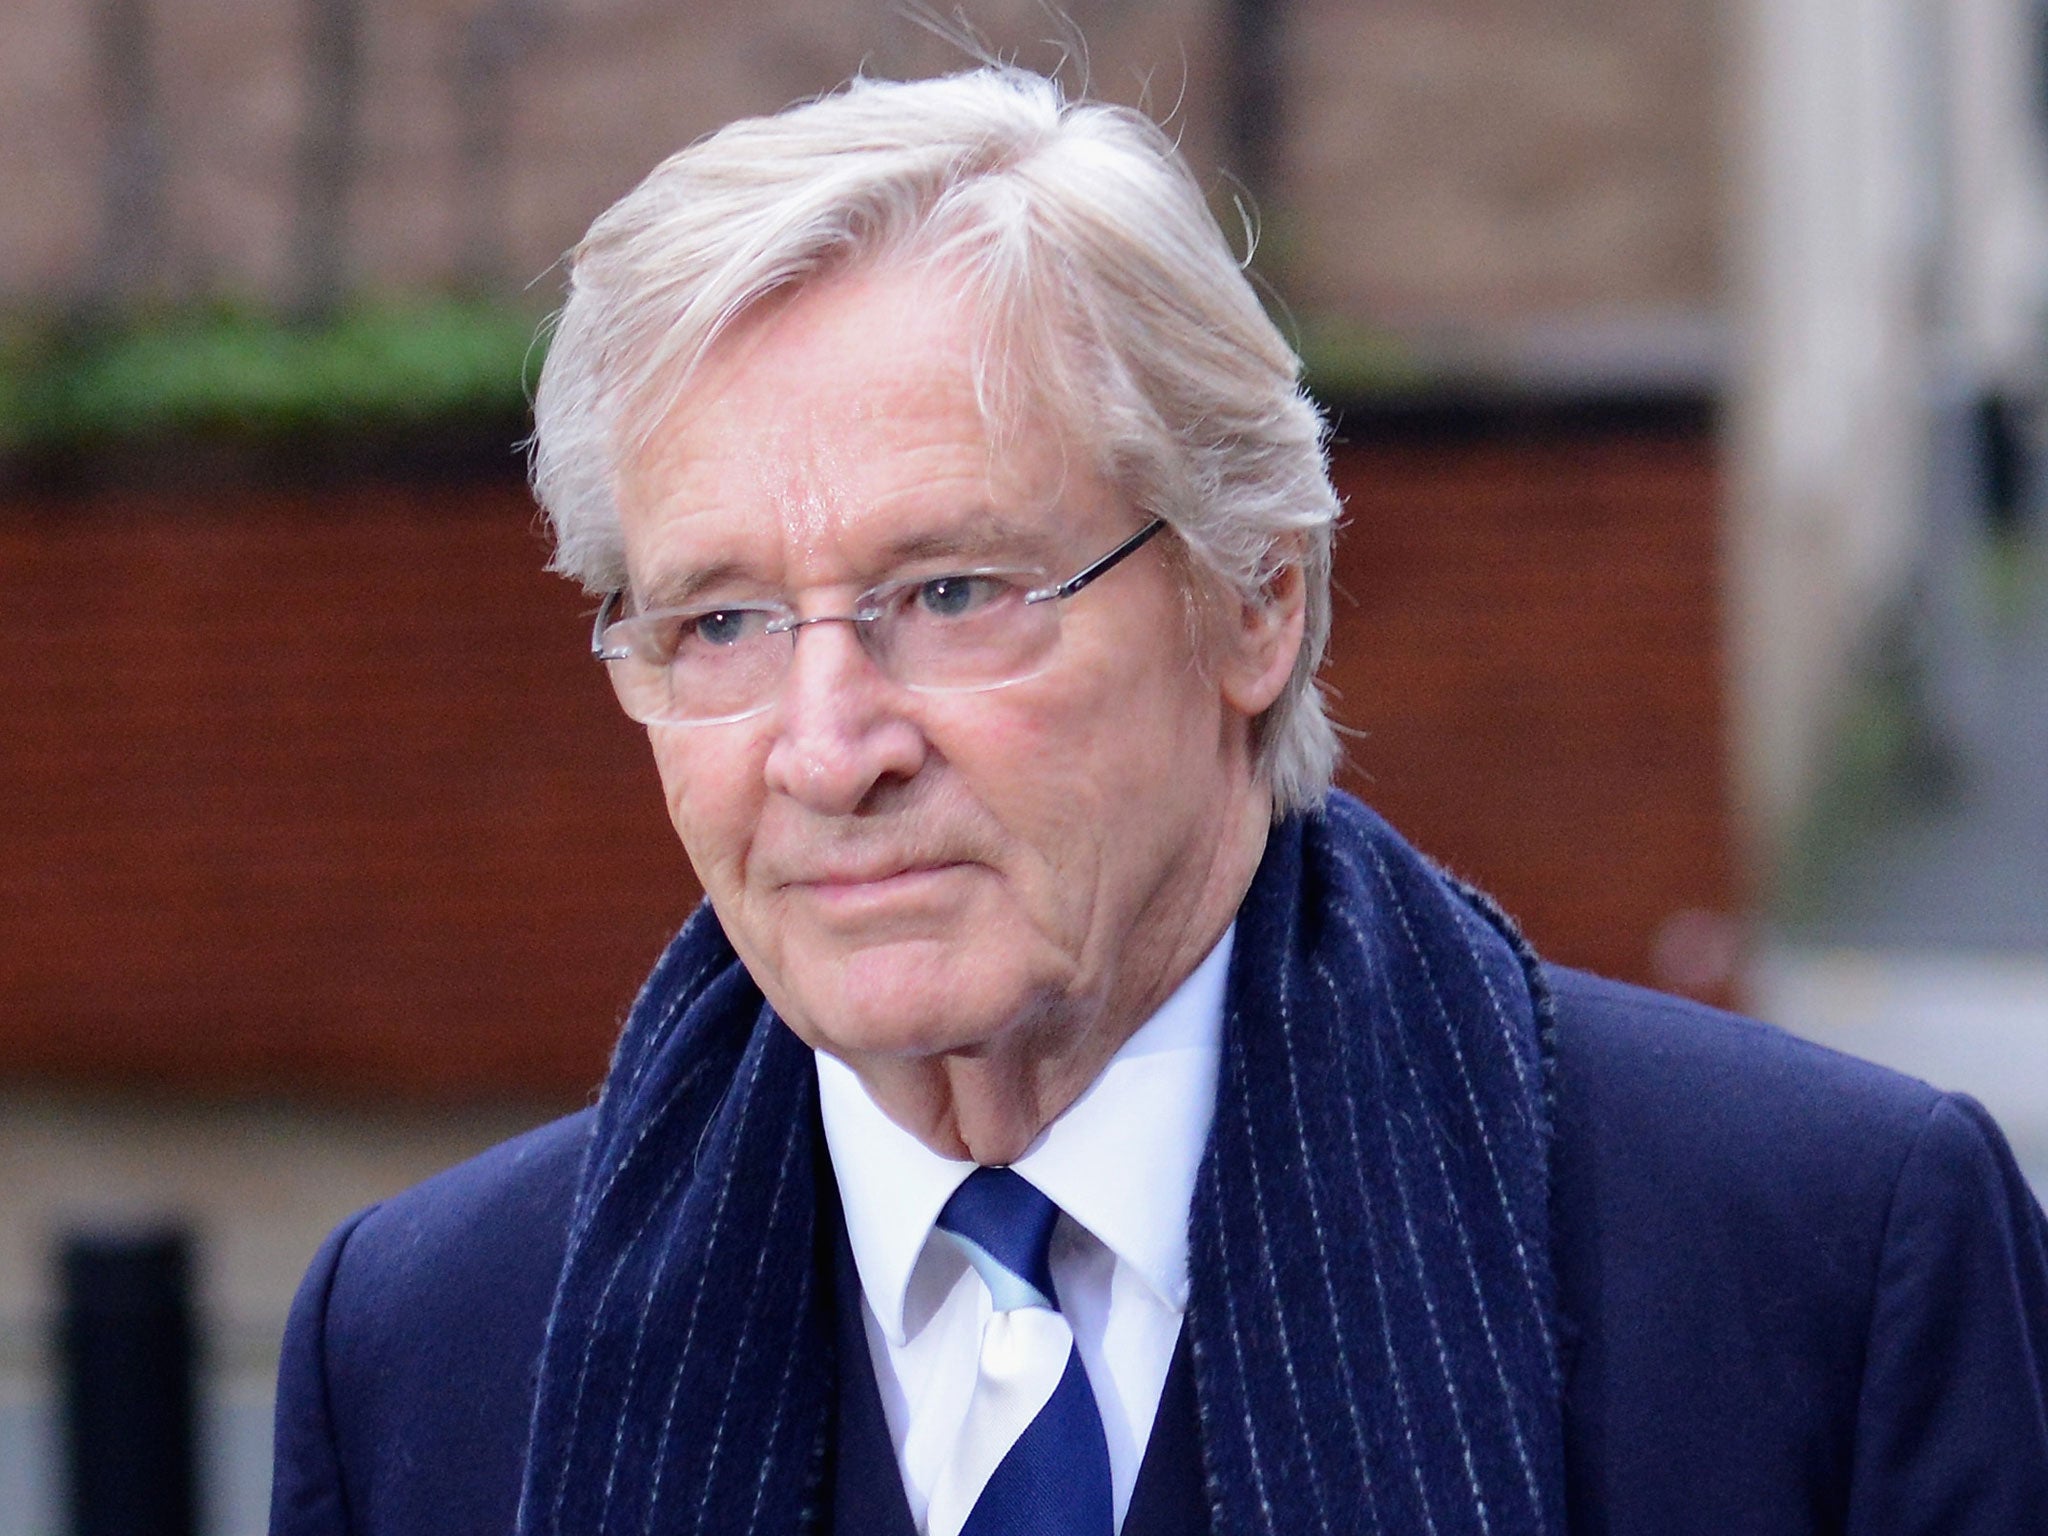 Actor William Roache arrives to face charges of indecent assault at Preston Crown Court on 15 January in Preston, Lancashire